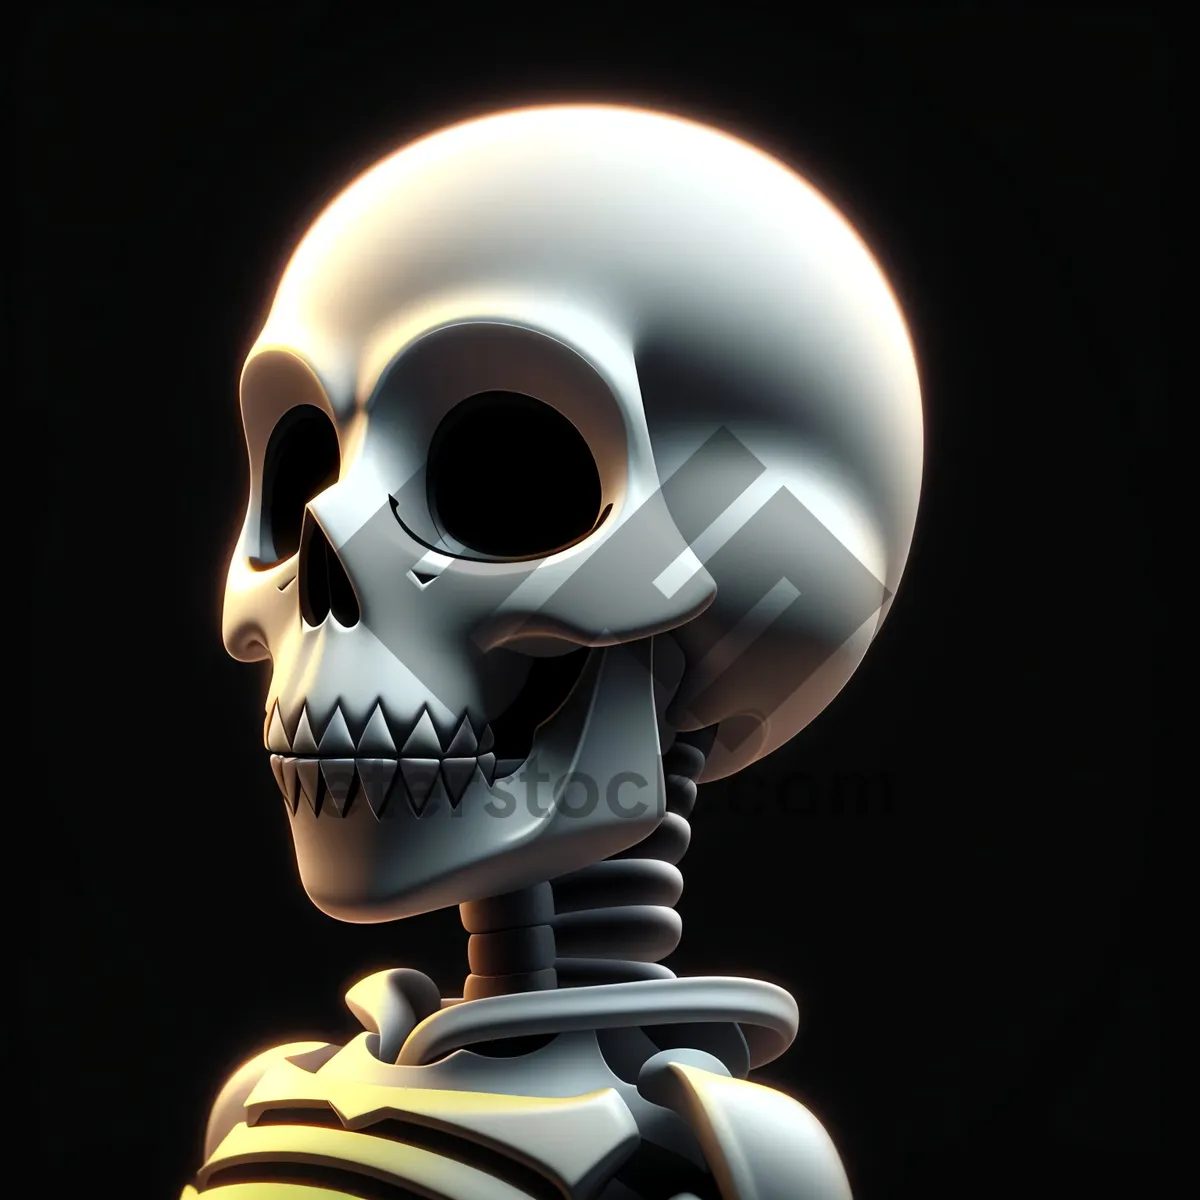 Picture of Terrifying 3D Skull Anatomy - Scary Pirate Inspiration